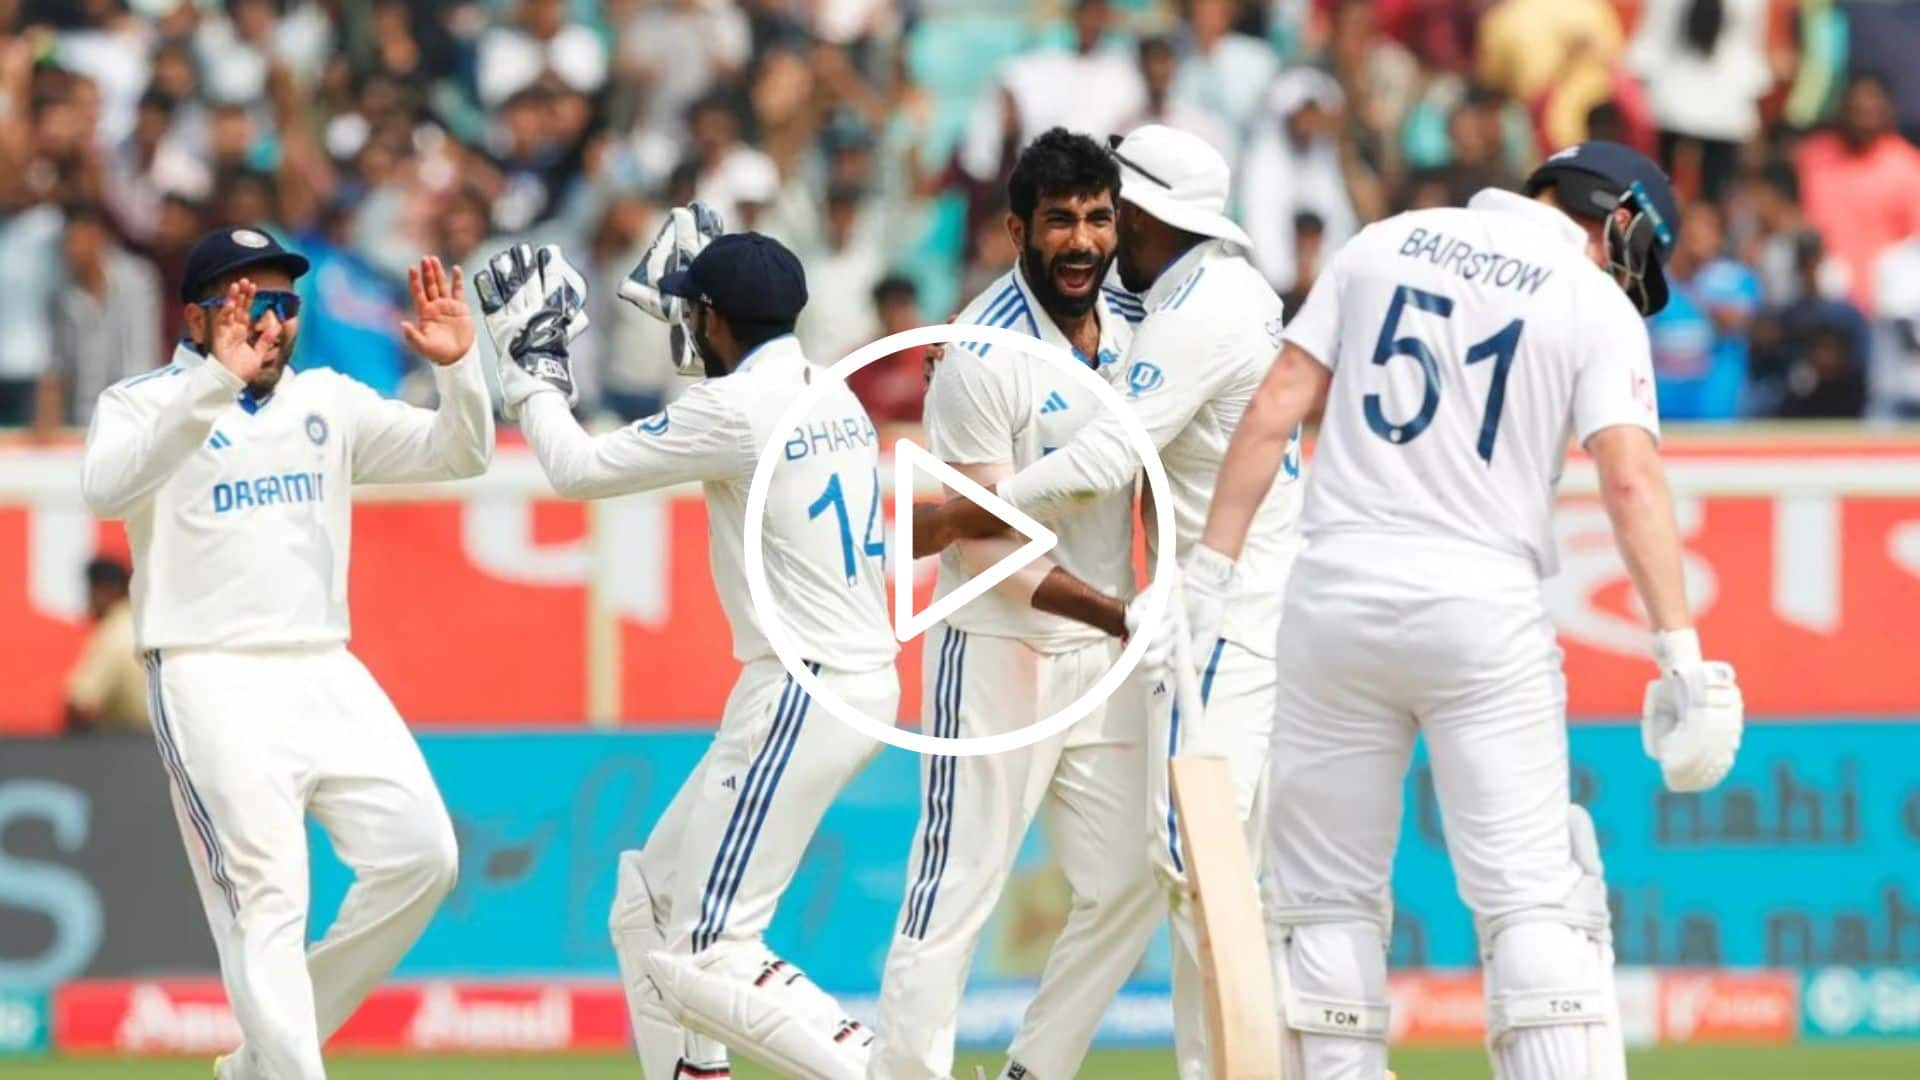 [Watch] Jasprit Bumrah Traps Bairstow LBW Before Lunch To Put India On Top in Vizag Test